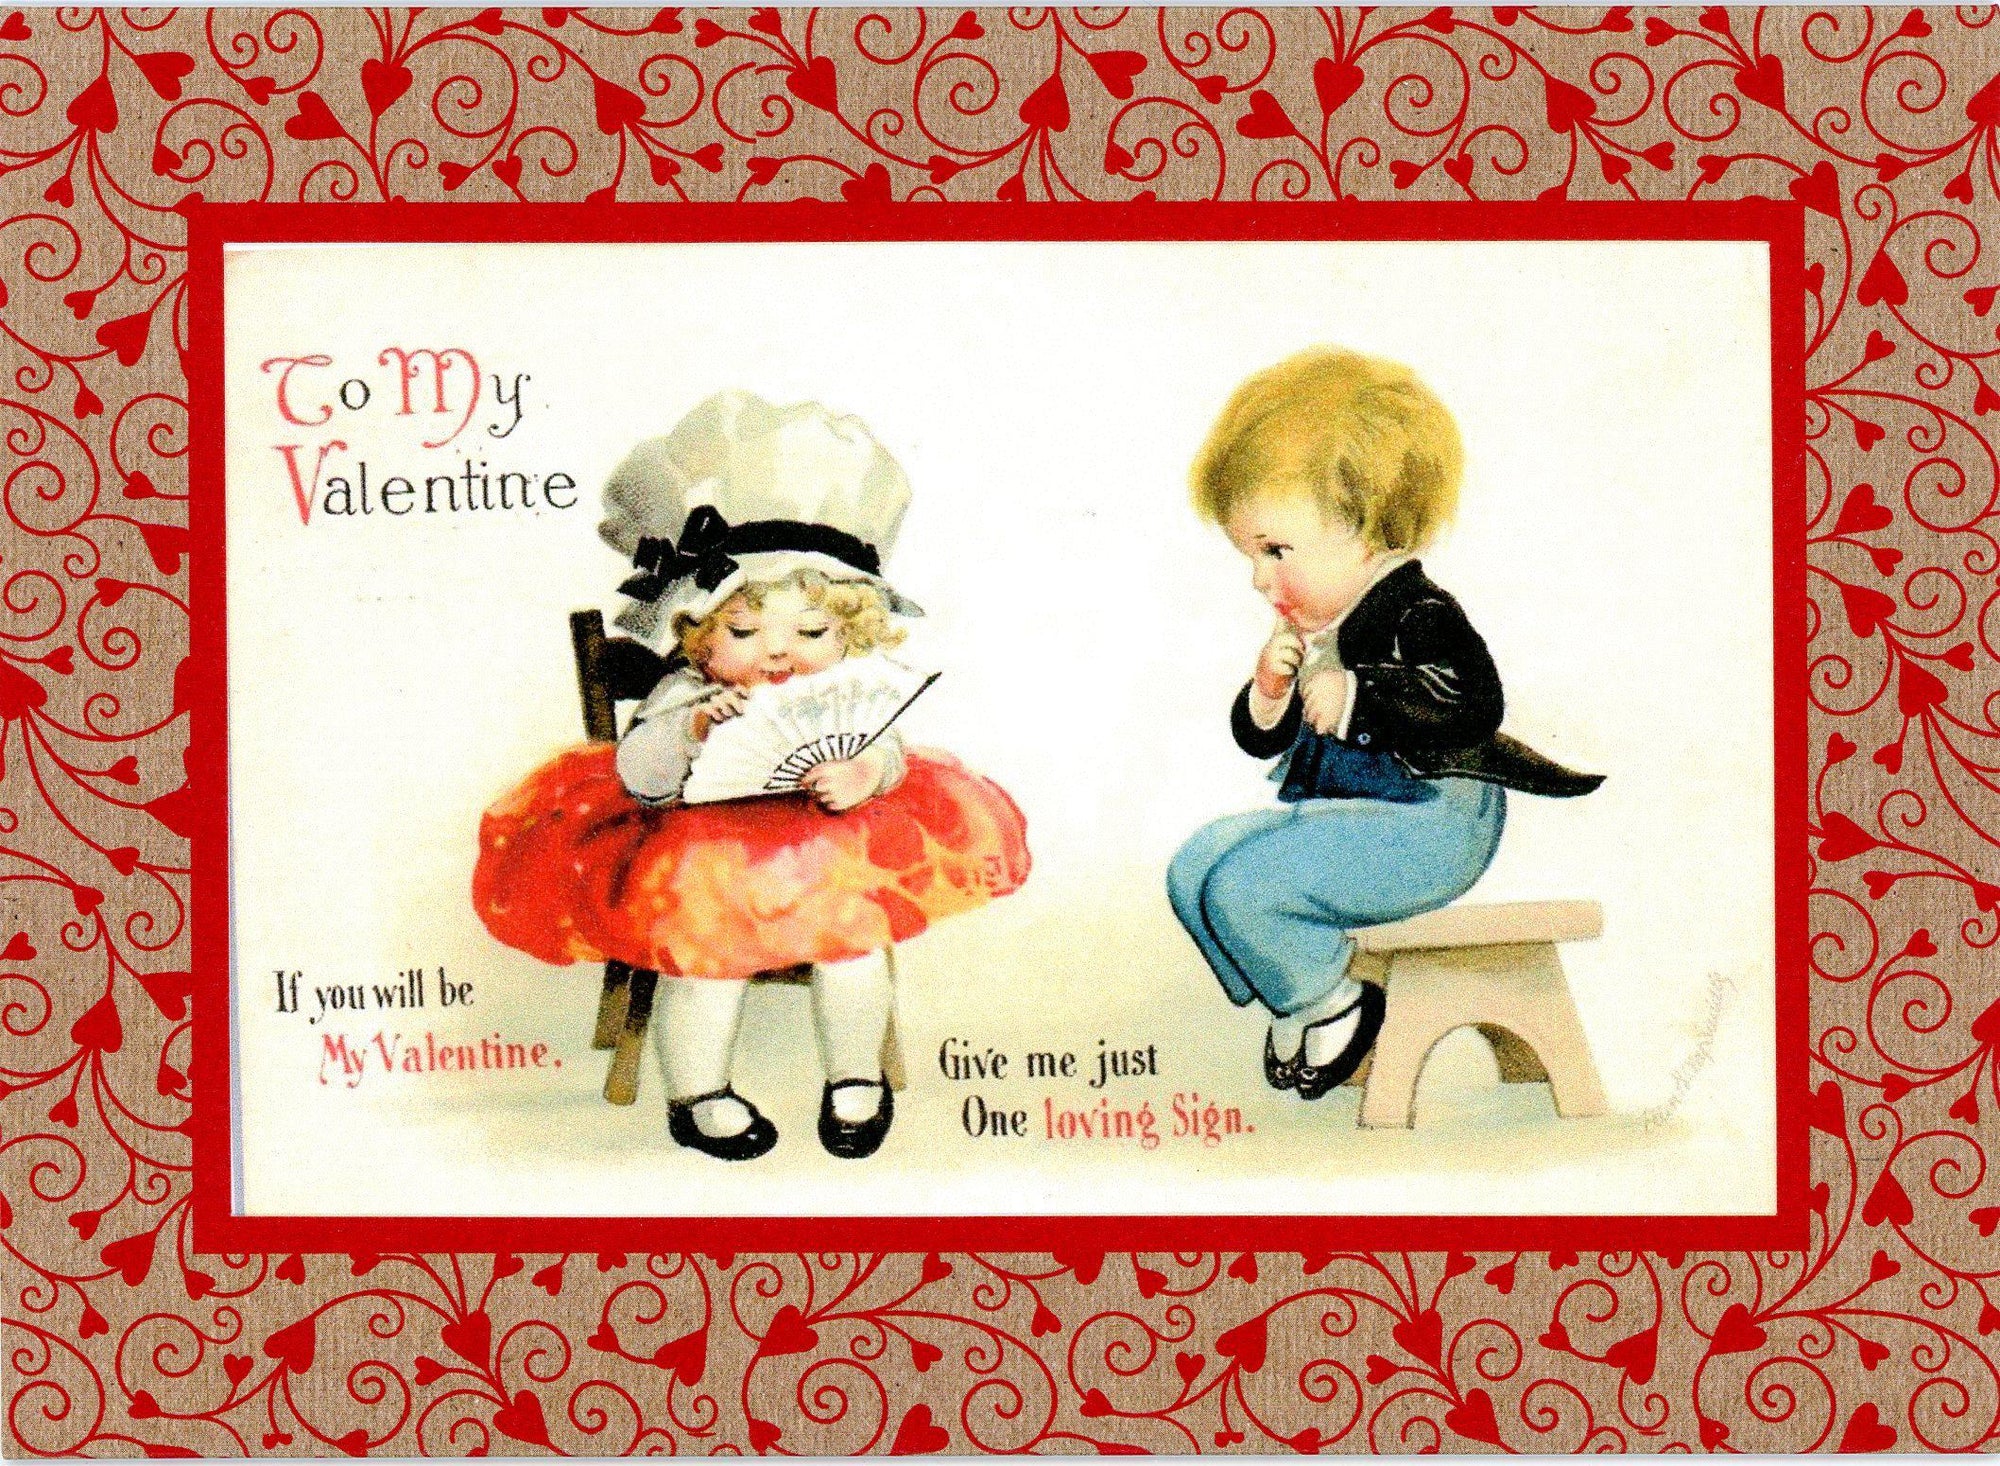 If You Will Be My Valentine-Greetings from the Past-Plymouth Cards